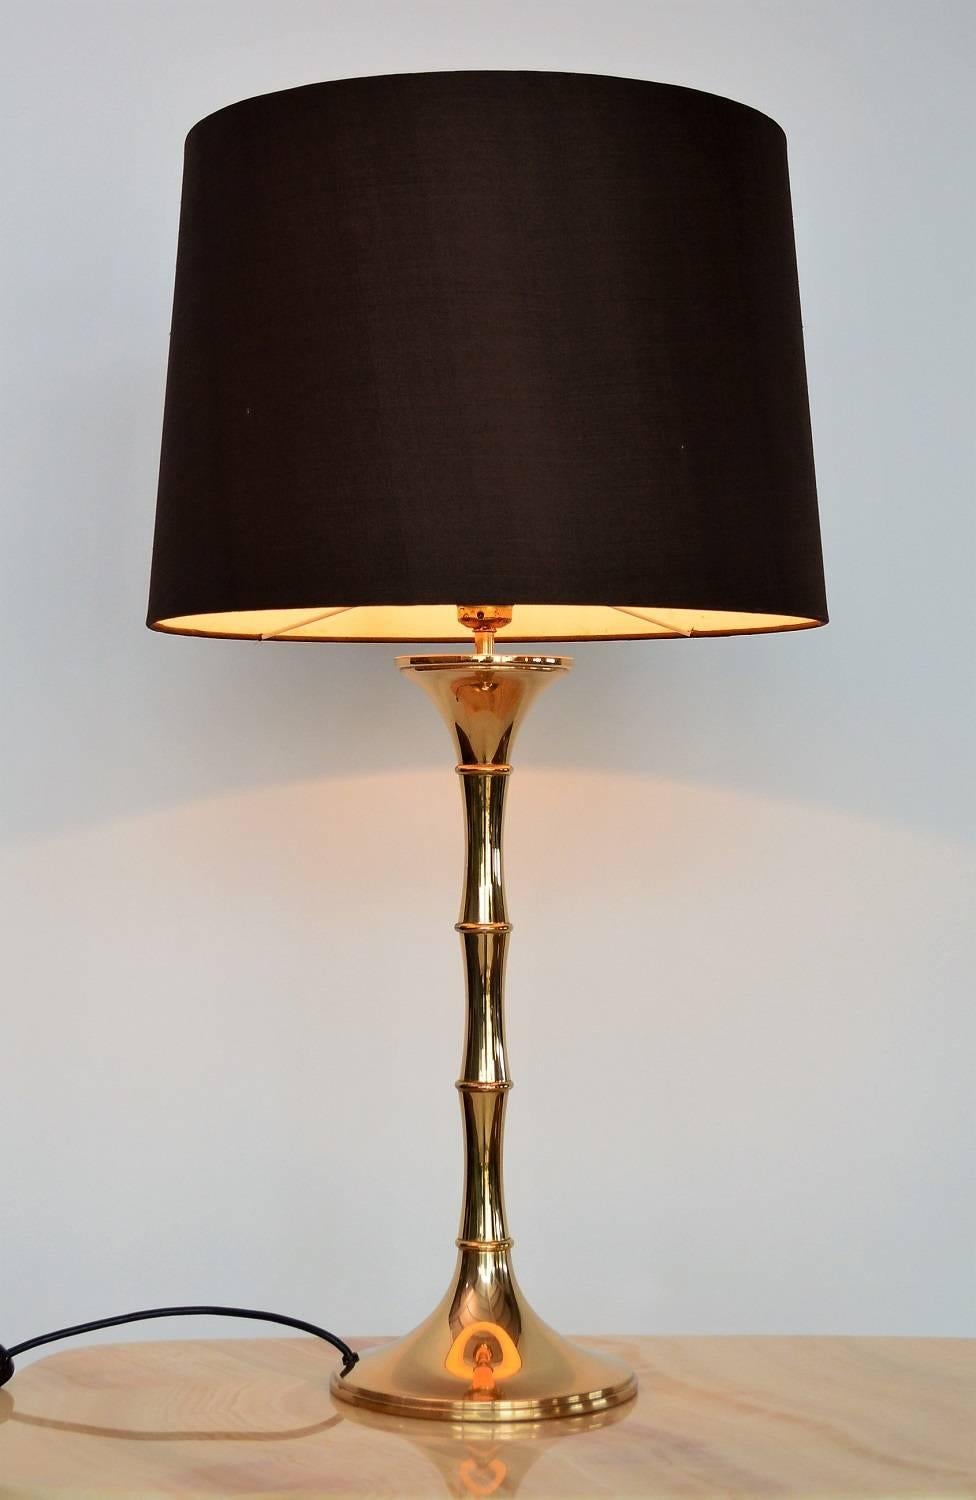 Beautiful table lamp in bamboo optic made in shiny, dark brass with beautiful patina.
Designed from Ingo Maurer, manufactured from MDesign in the 1960s.
The lamp is equipped with original brown lampshade in silk. It could be redone as